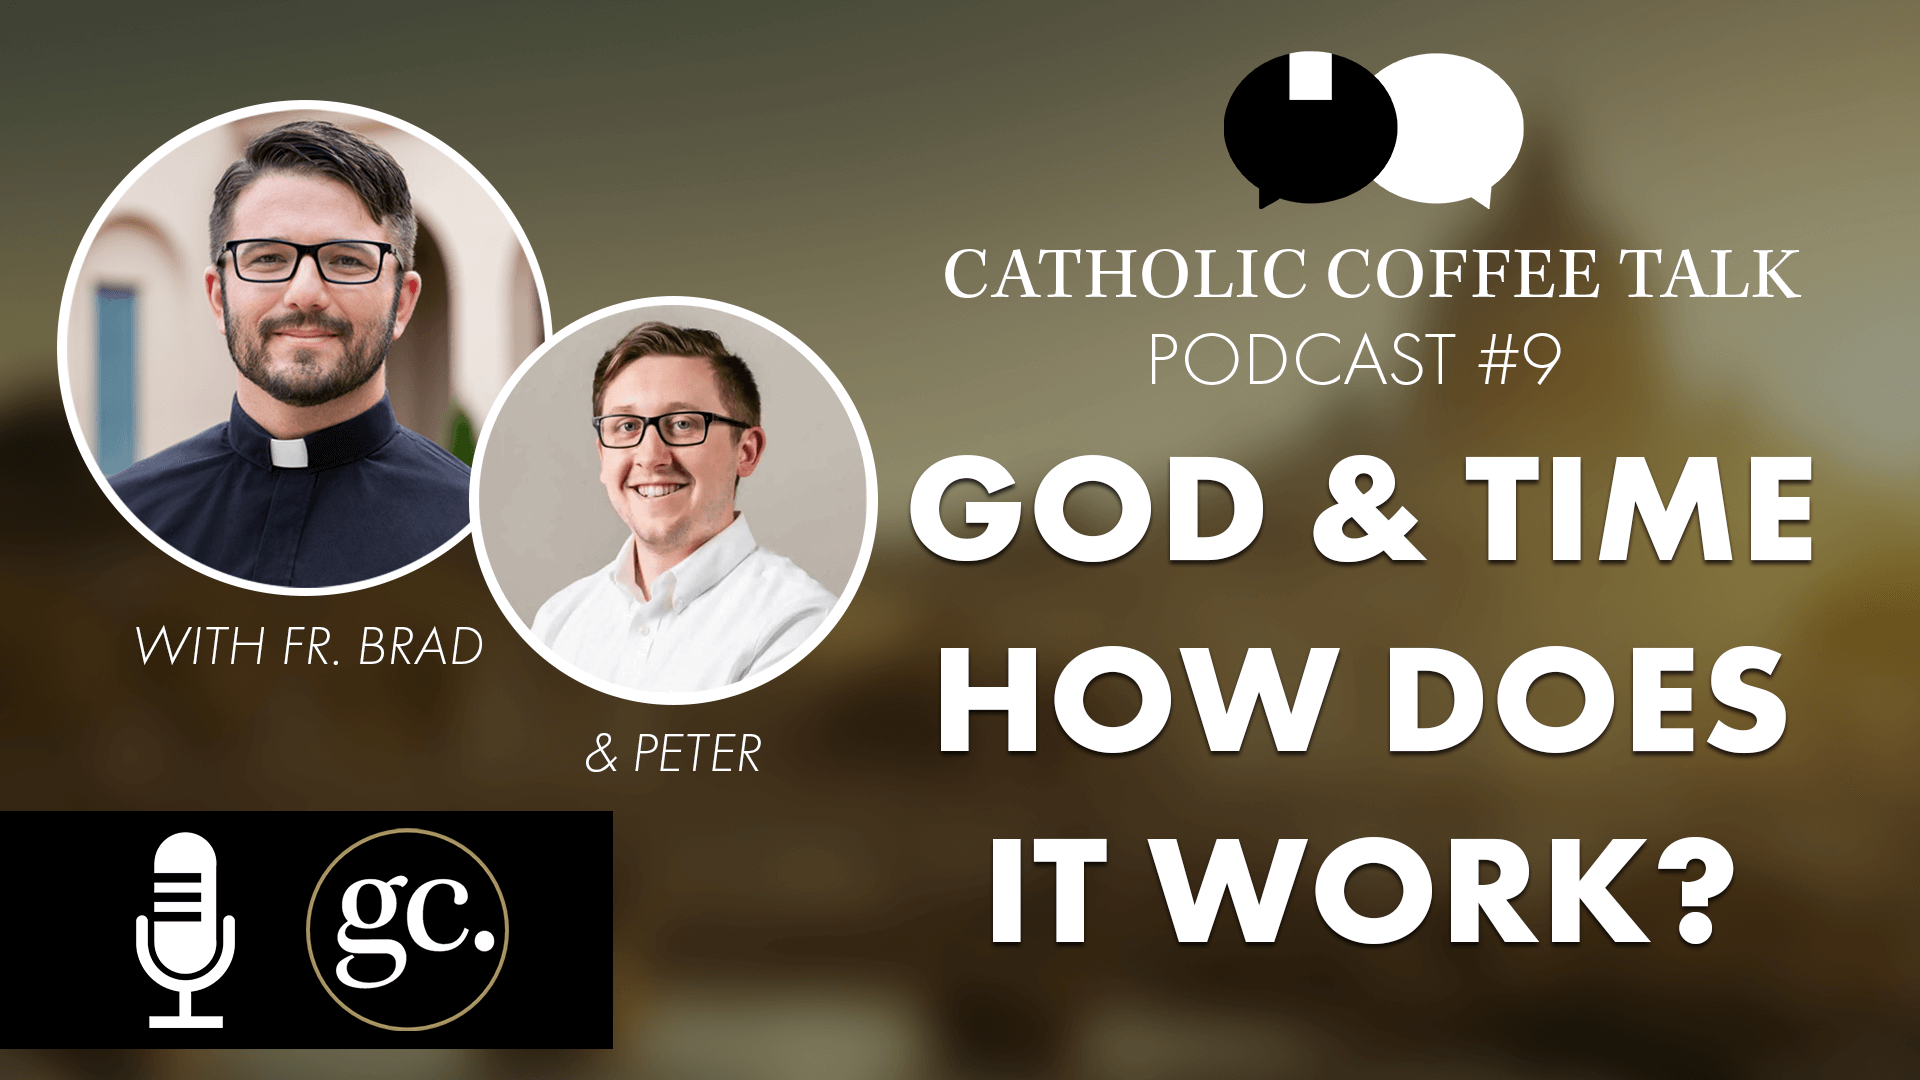 Catholic Coffee Talk #9 | God & Time: How Does That Work?